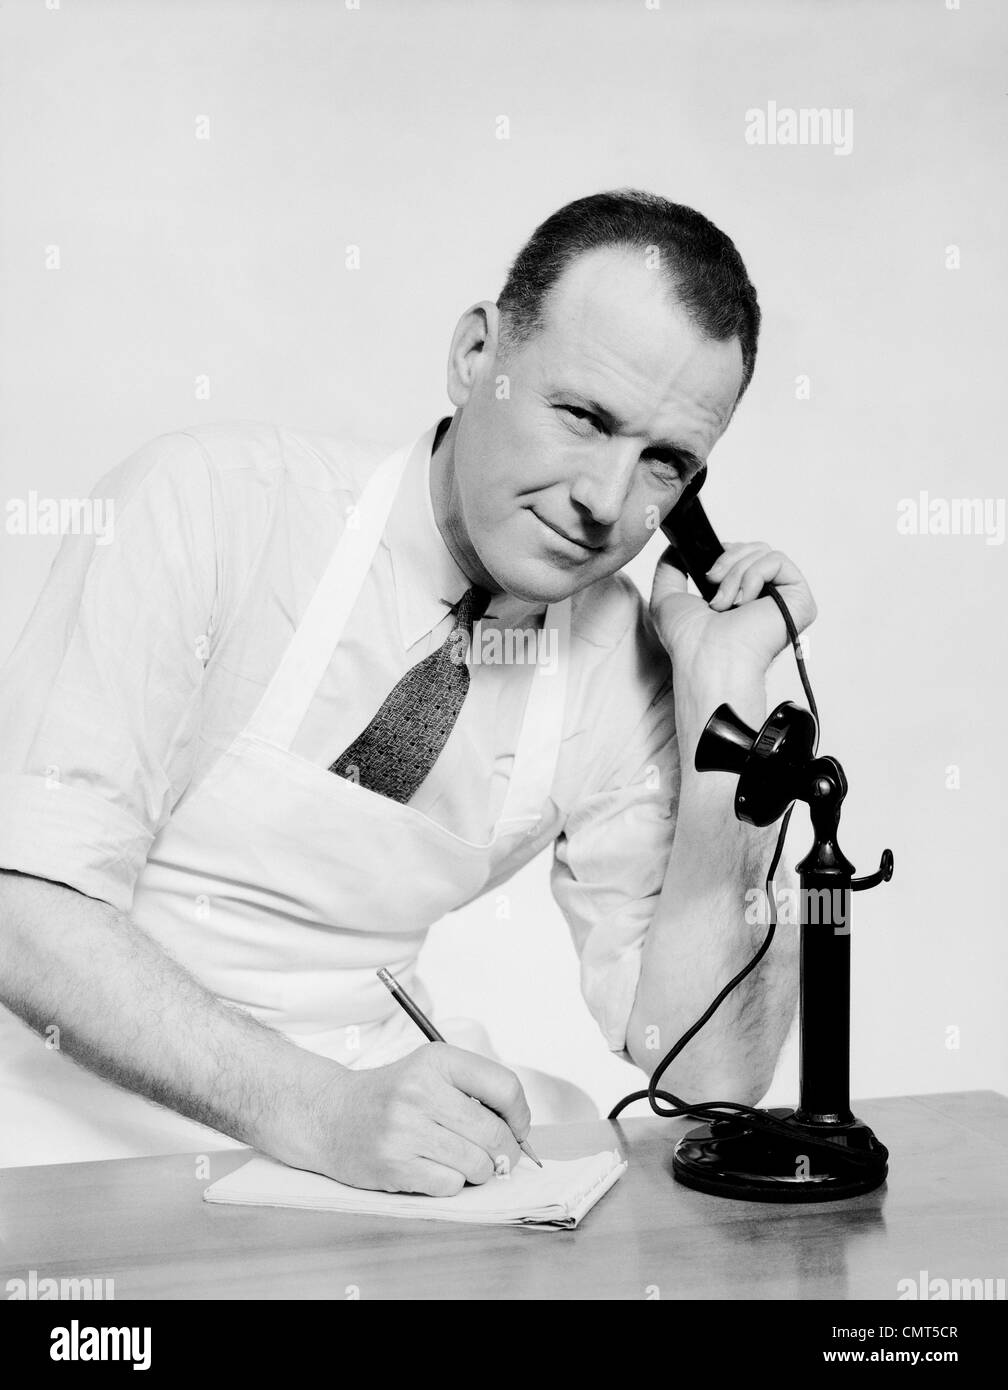 1930s PORTRAIT MAN CLERK WEARING APRON TALKING ON OLD BLACK CANDLESTICK TELEPHONE WRITING ON PAD WITH PENCIL LOOKING AT CAMERA Stock Photo